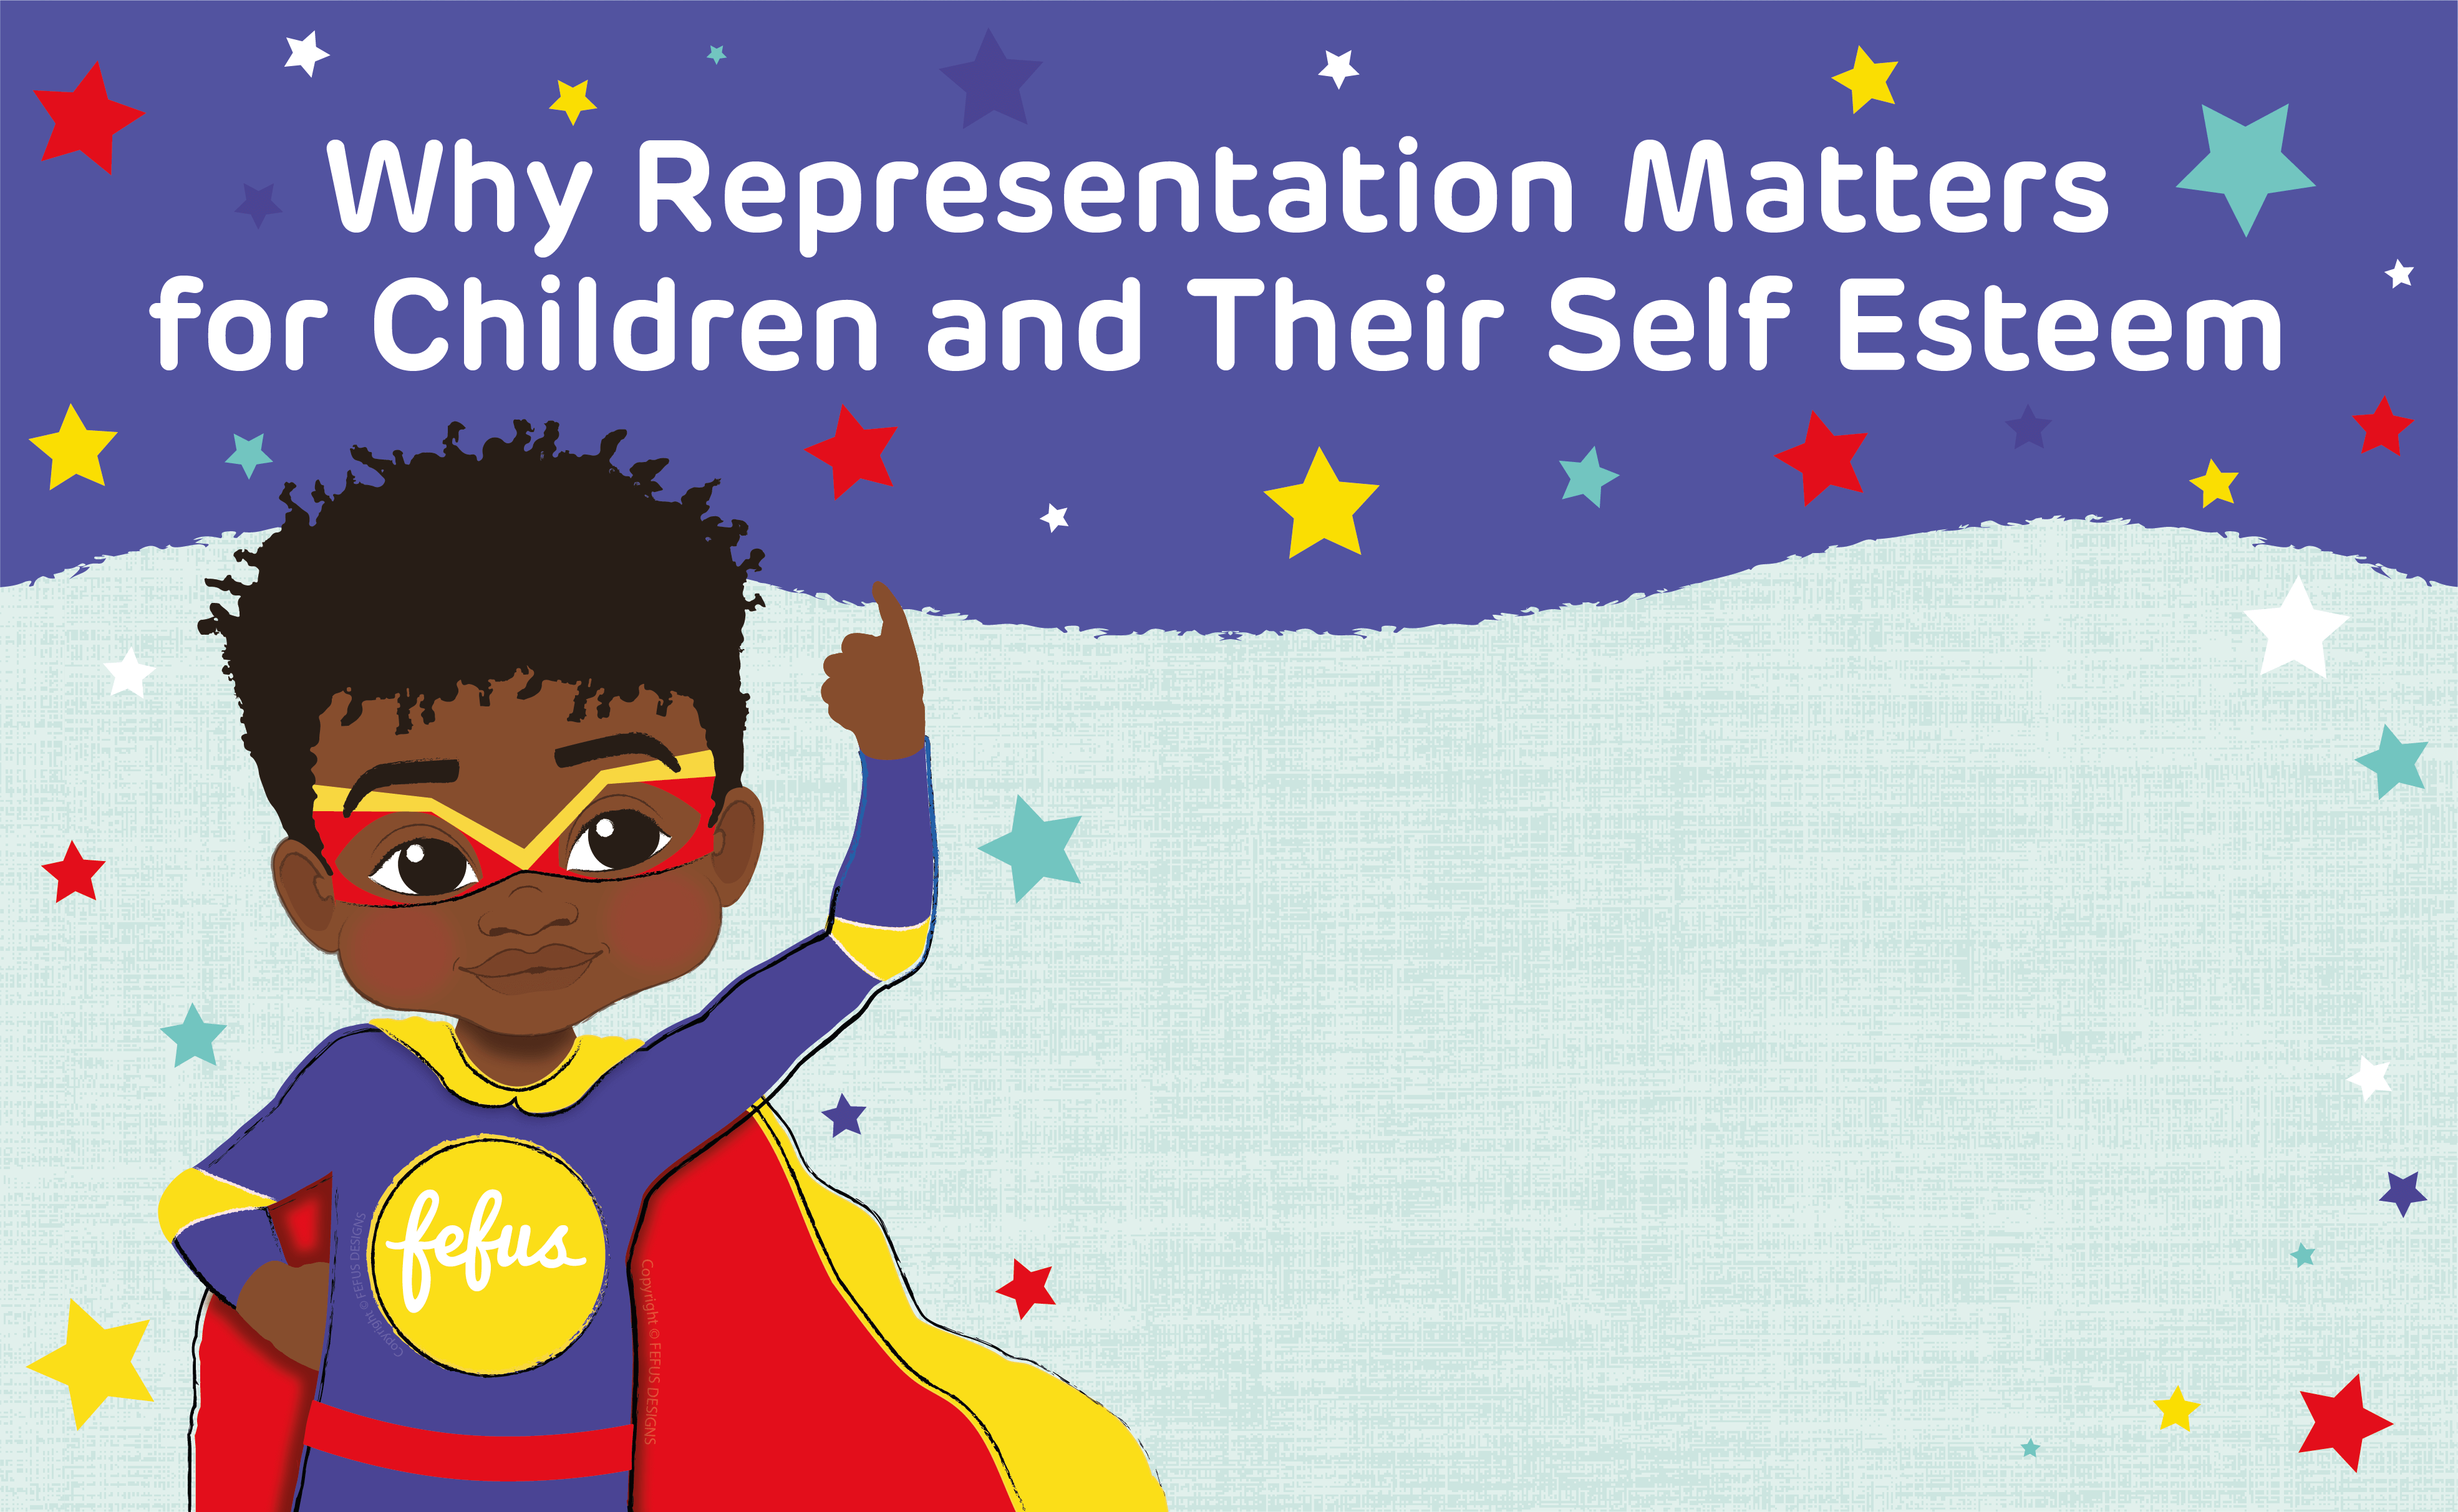 Why Representation Matters for Children and Their Self Esteem